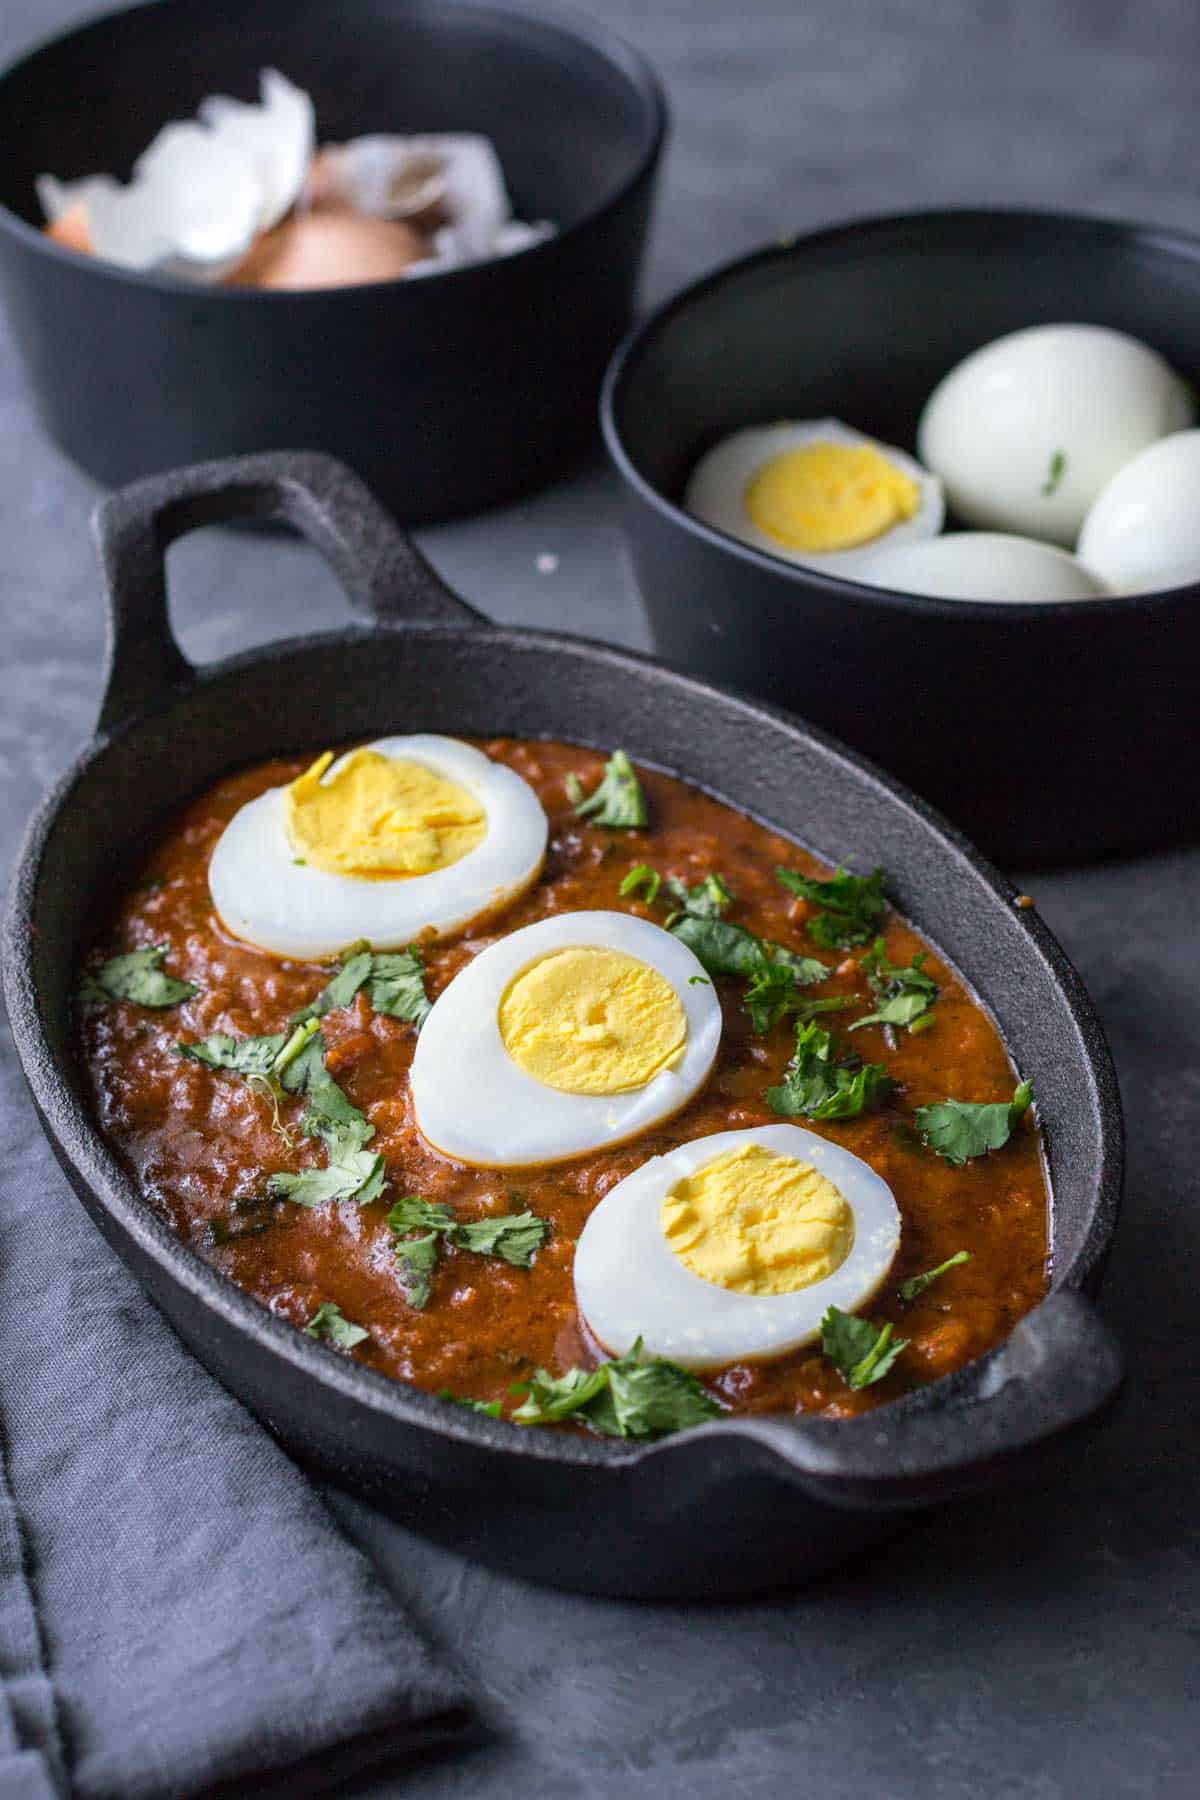 Egg curry served in a black serving bowl